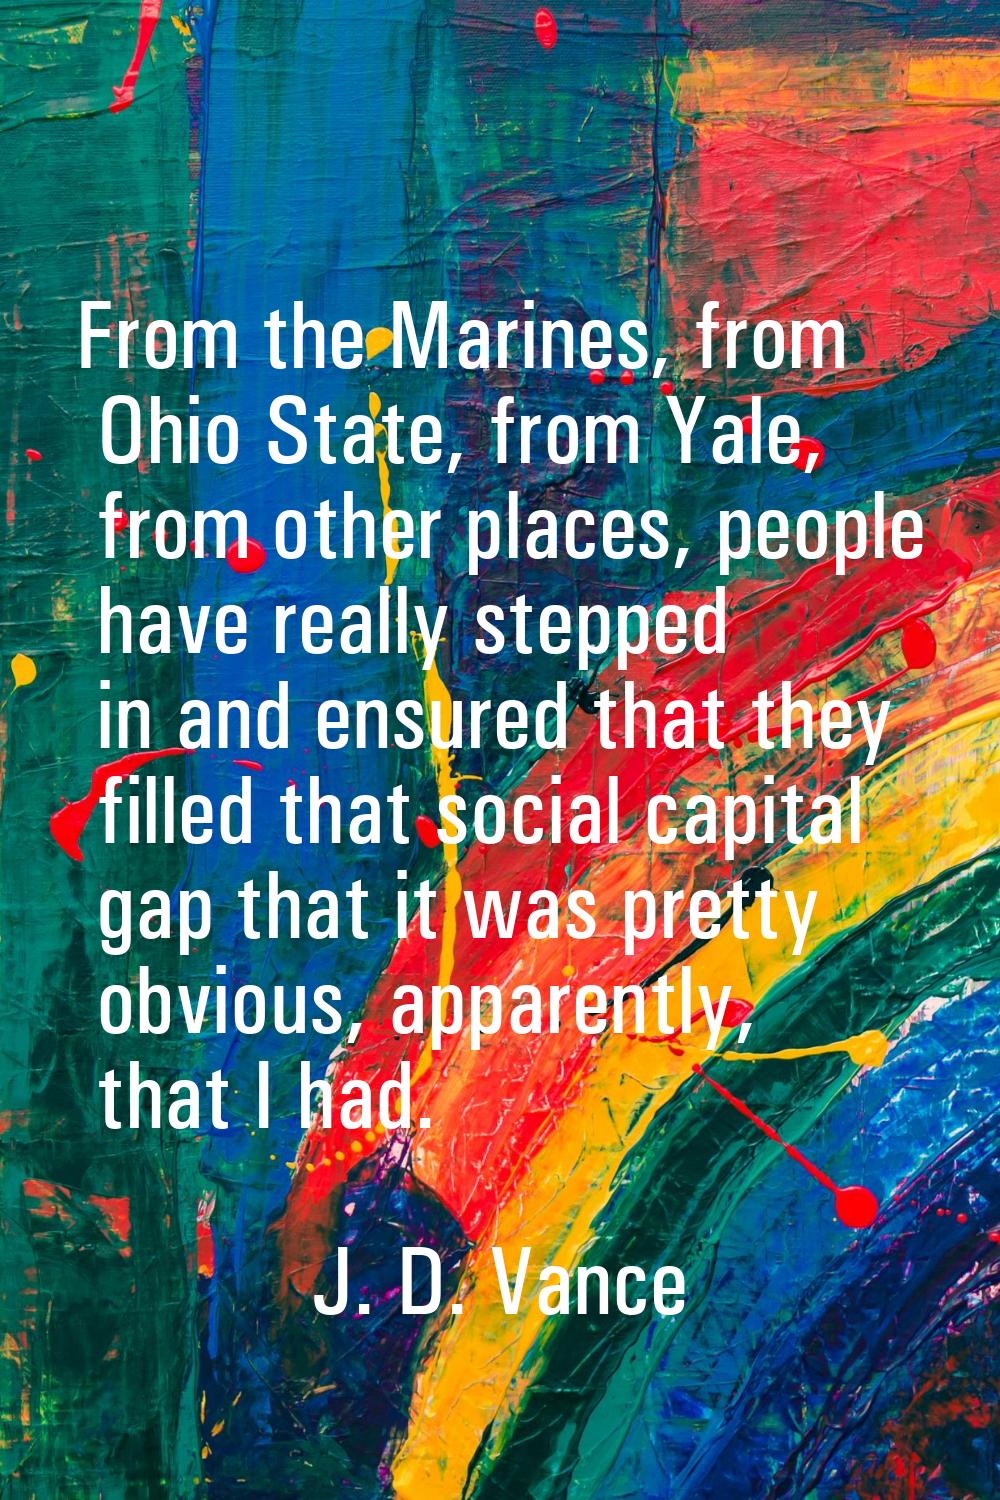 From the Marines, from Ohio State, from Yale, from other places, people have really stepped in and 